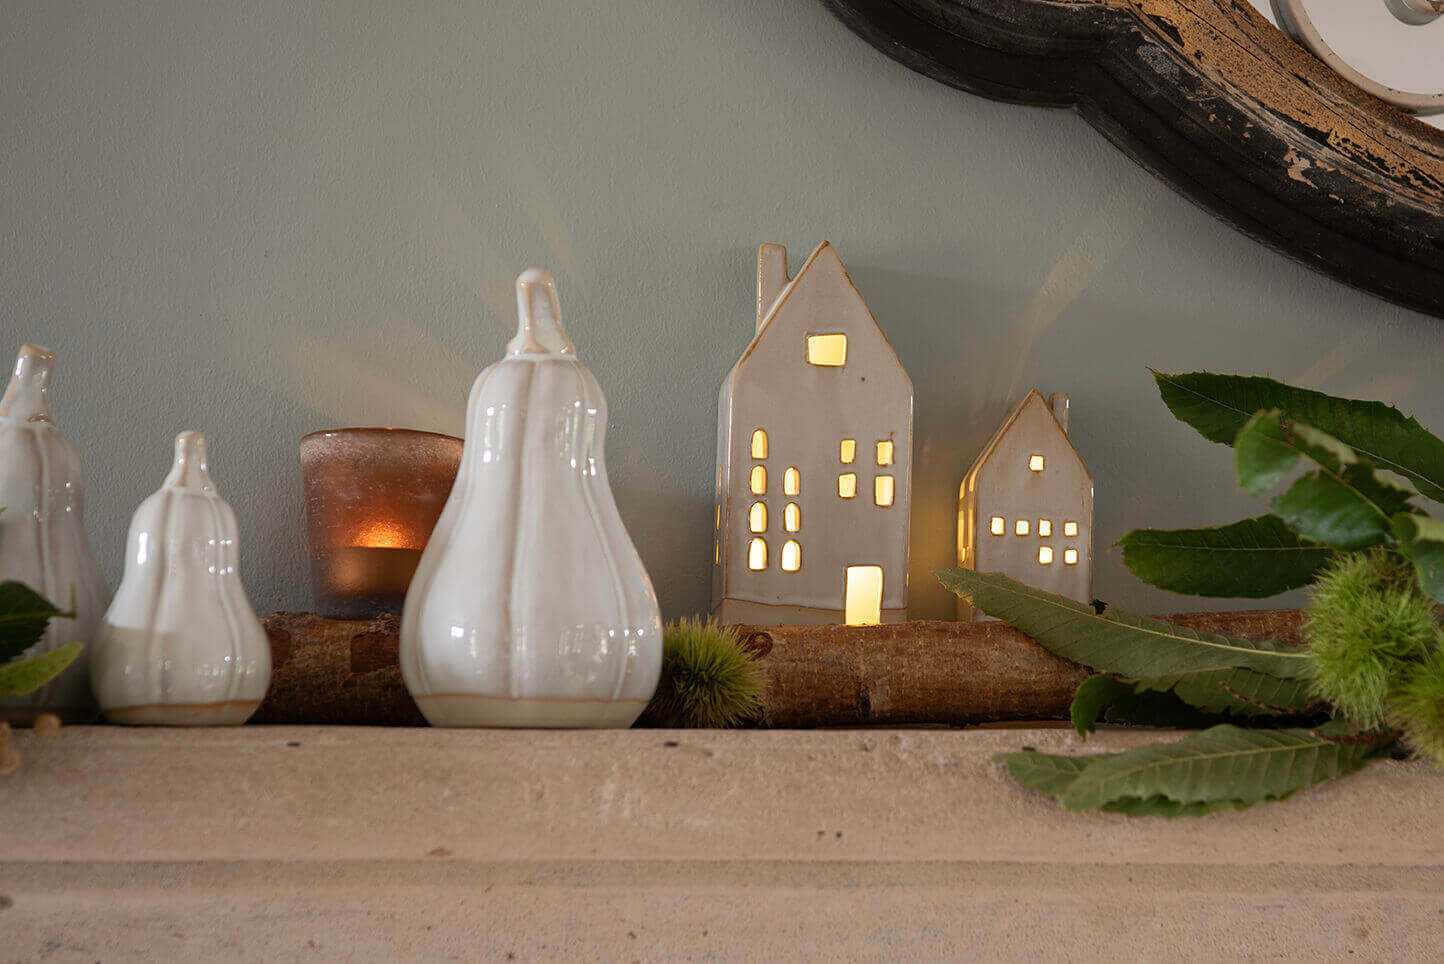 A decorative display likely set in a domestic setting. Resting on a stone base, various objects are arrayed against a wall with a soft gray-green hue. On the left side, three white ceramic figures are seen, shaped like stylized pumpkins or pears with smooth, shiny surfaces. Beside these figures sits a candle holder containing a candle, which radiates a warm, orange-like light through the translucent, brown-tinted glass.

In the center and to the right of the image, there are three ceramic houses with a simplistic design, finished in a matte gray shade. They feature cut-out windows and doors that let light shine through, suggesting that candles or lights are placed inside, giving these houses a cozy glow. It appears that these houses are part of a decorative set meant to represent a sort of miniature village. The entire setting is embellished with natural elements such as a branch and several green leaves, giving the scene a fresh look. The light emanating from the candle and the illuminated houses creates an atmosphere of warmth and conviviality, often associated with homey decorations. The overall image is calming and serene.